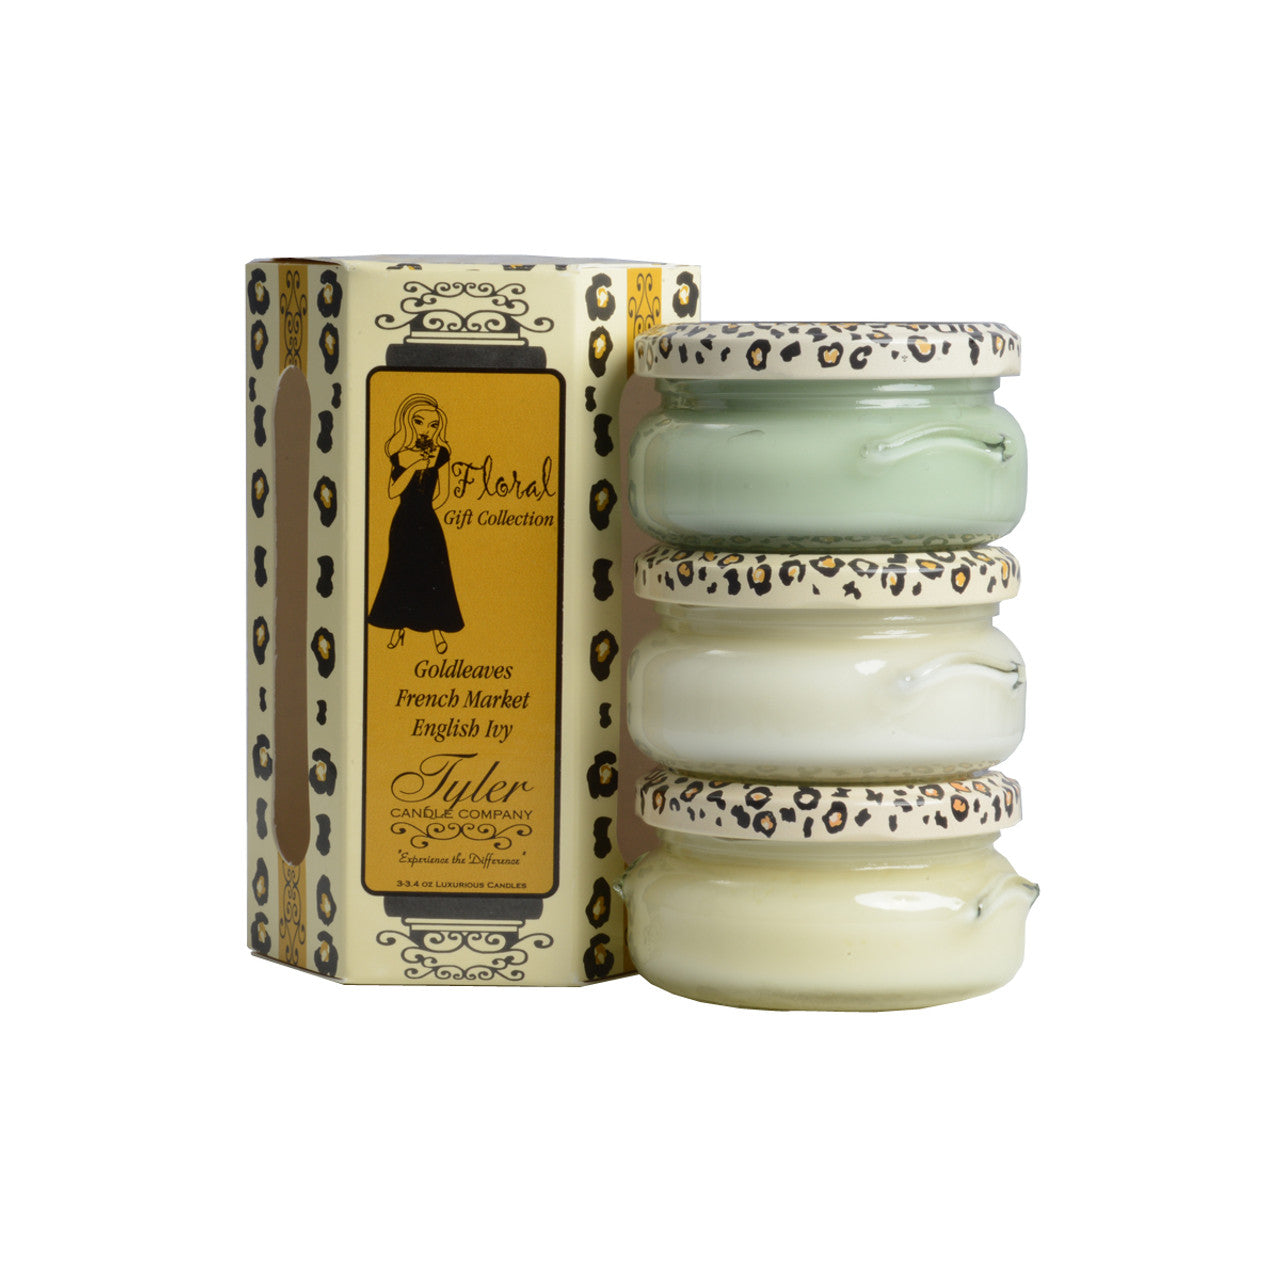 Tyler Candle 3 Piece Floral Gift Collection